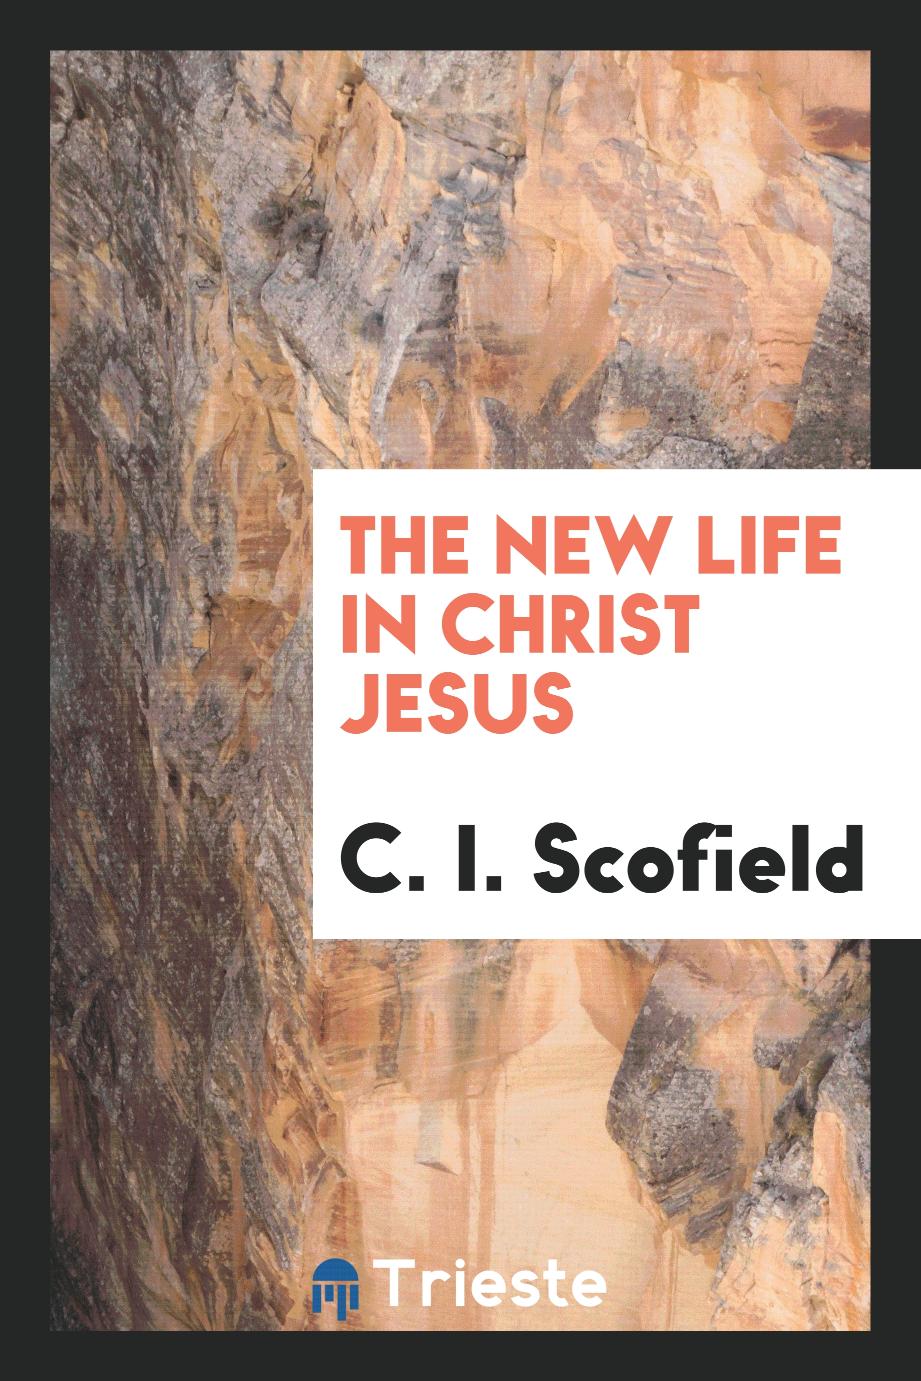 The new life in Christ Jesus